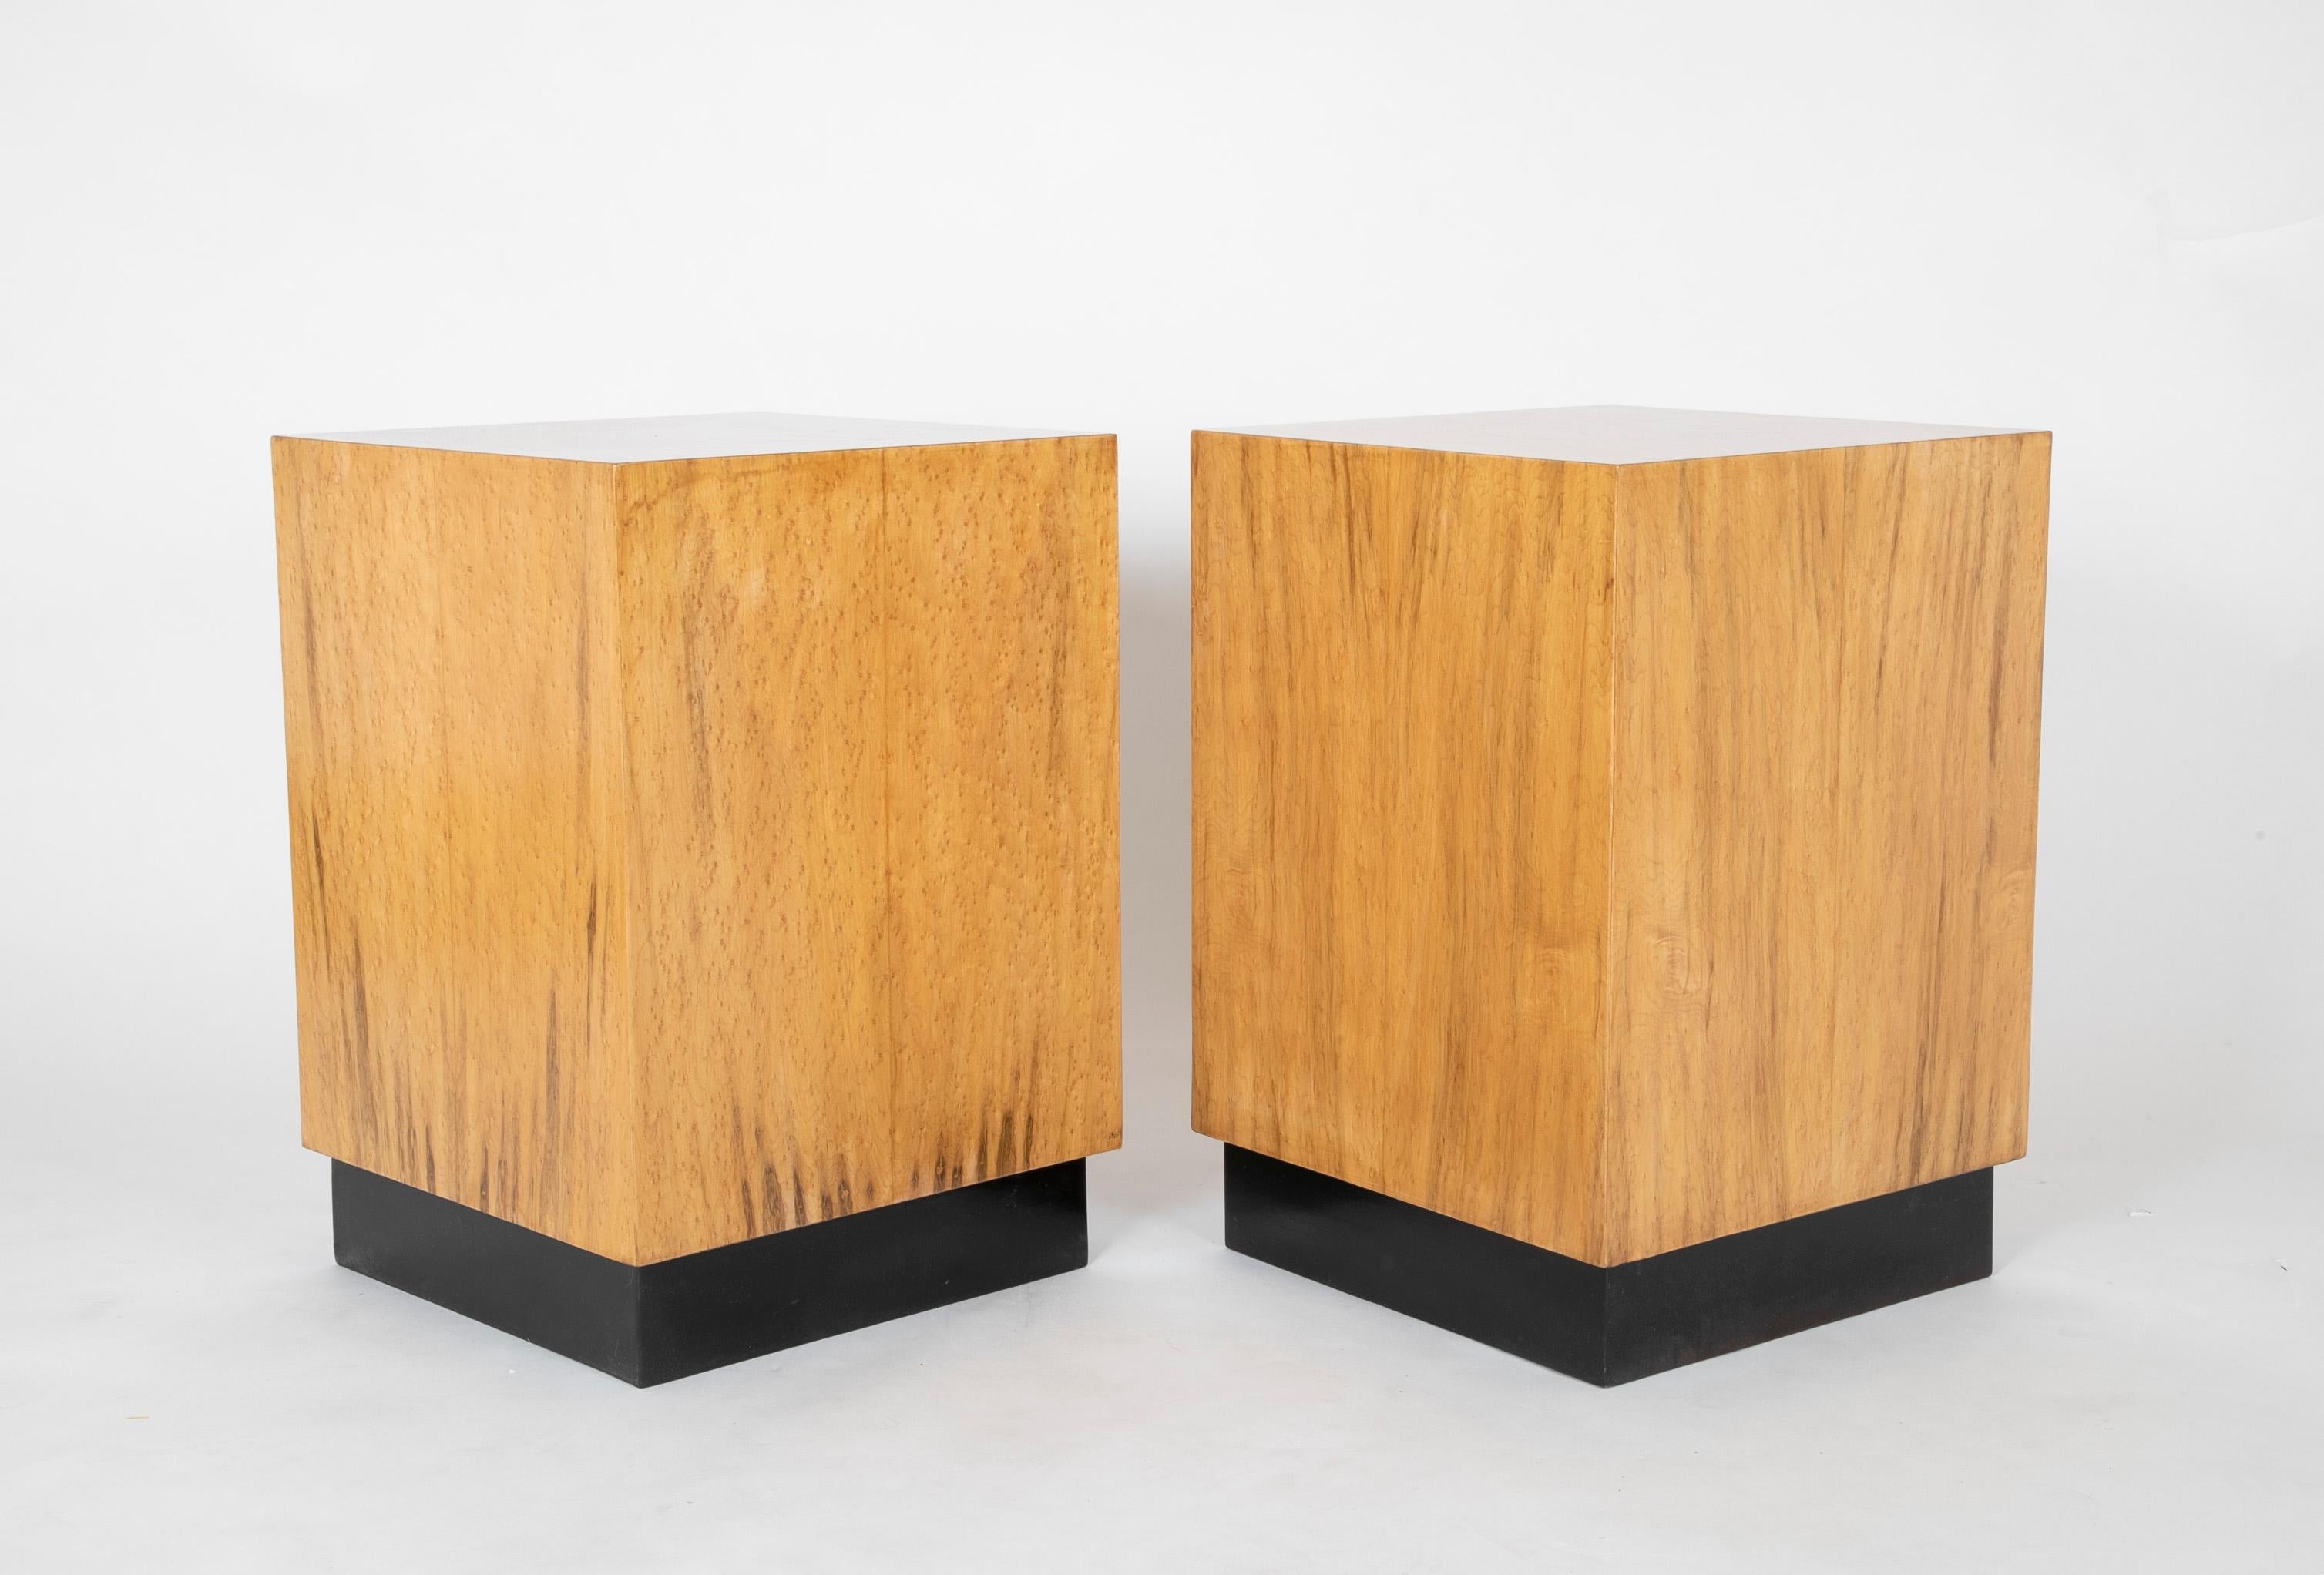 Great looking pair of mid 20th century cube-form side tables covered in birds-eyes maple veneer, on recessed black bases. These make very distinctive end tables or pedestals. At 25.5 inches high, they are perfect for either side of living room